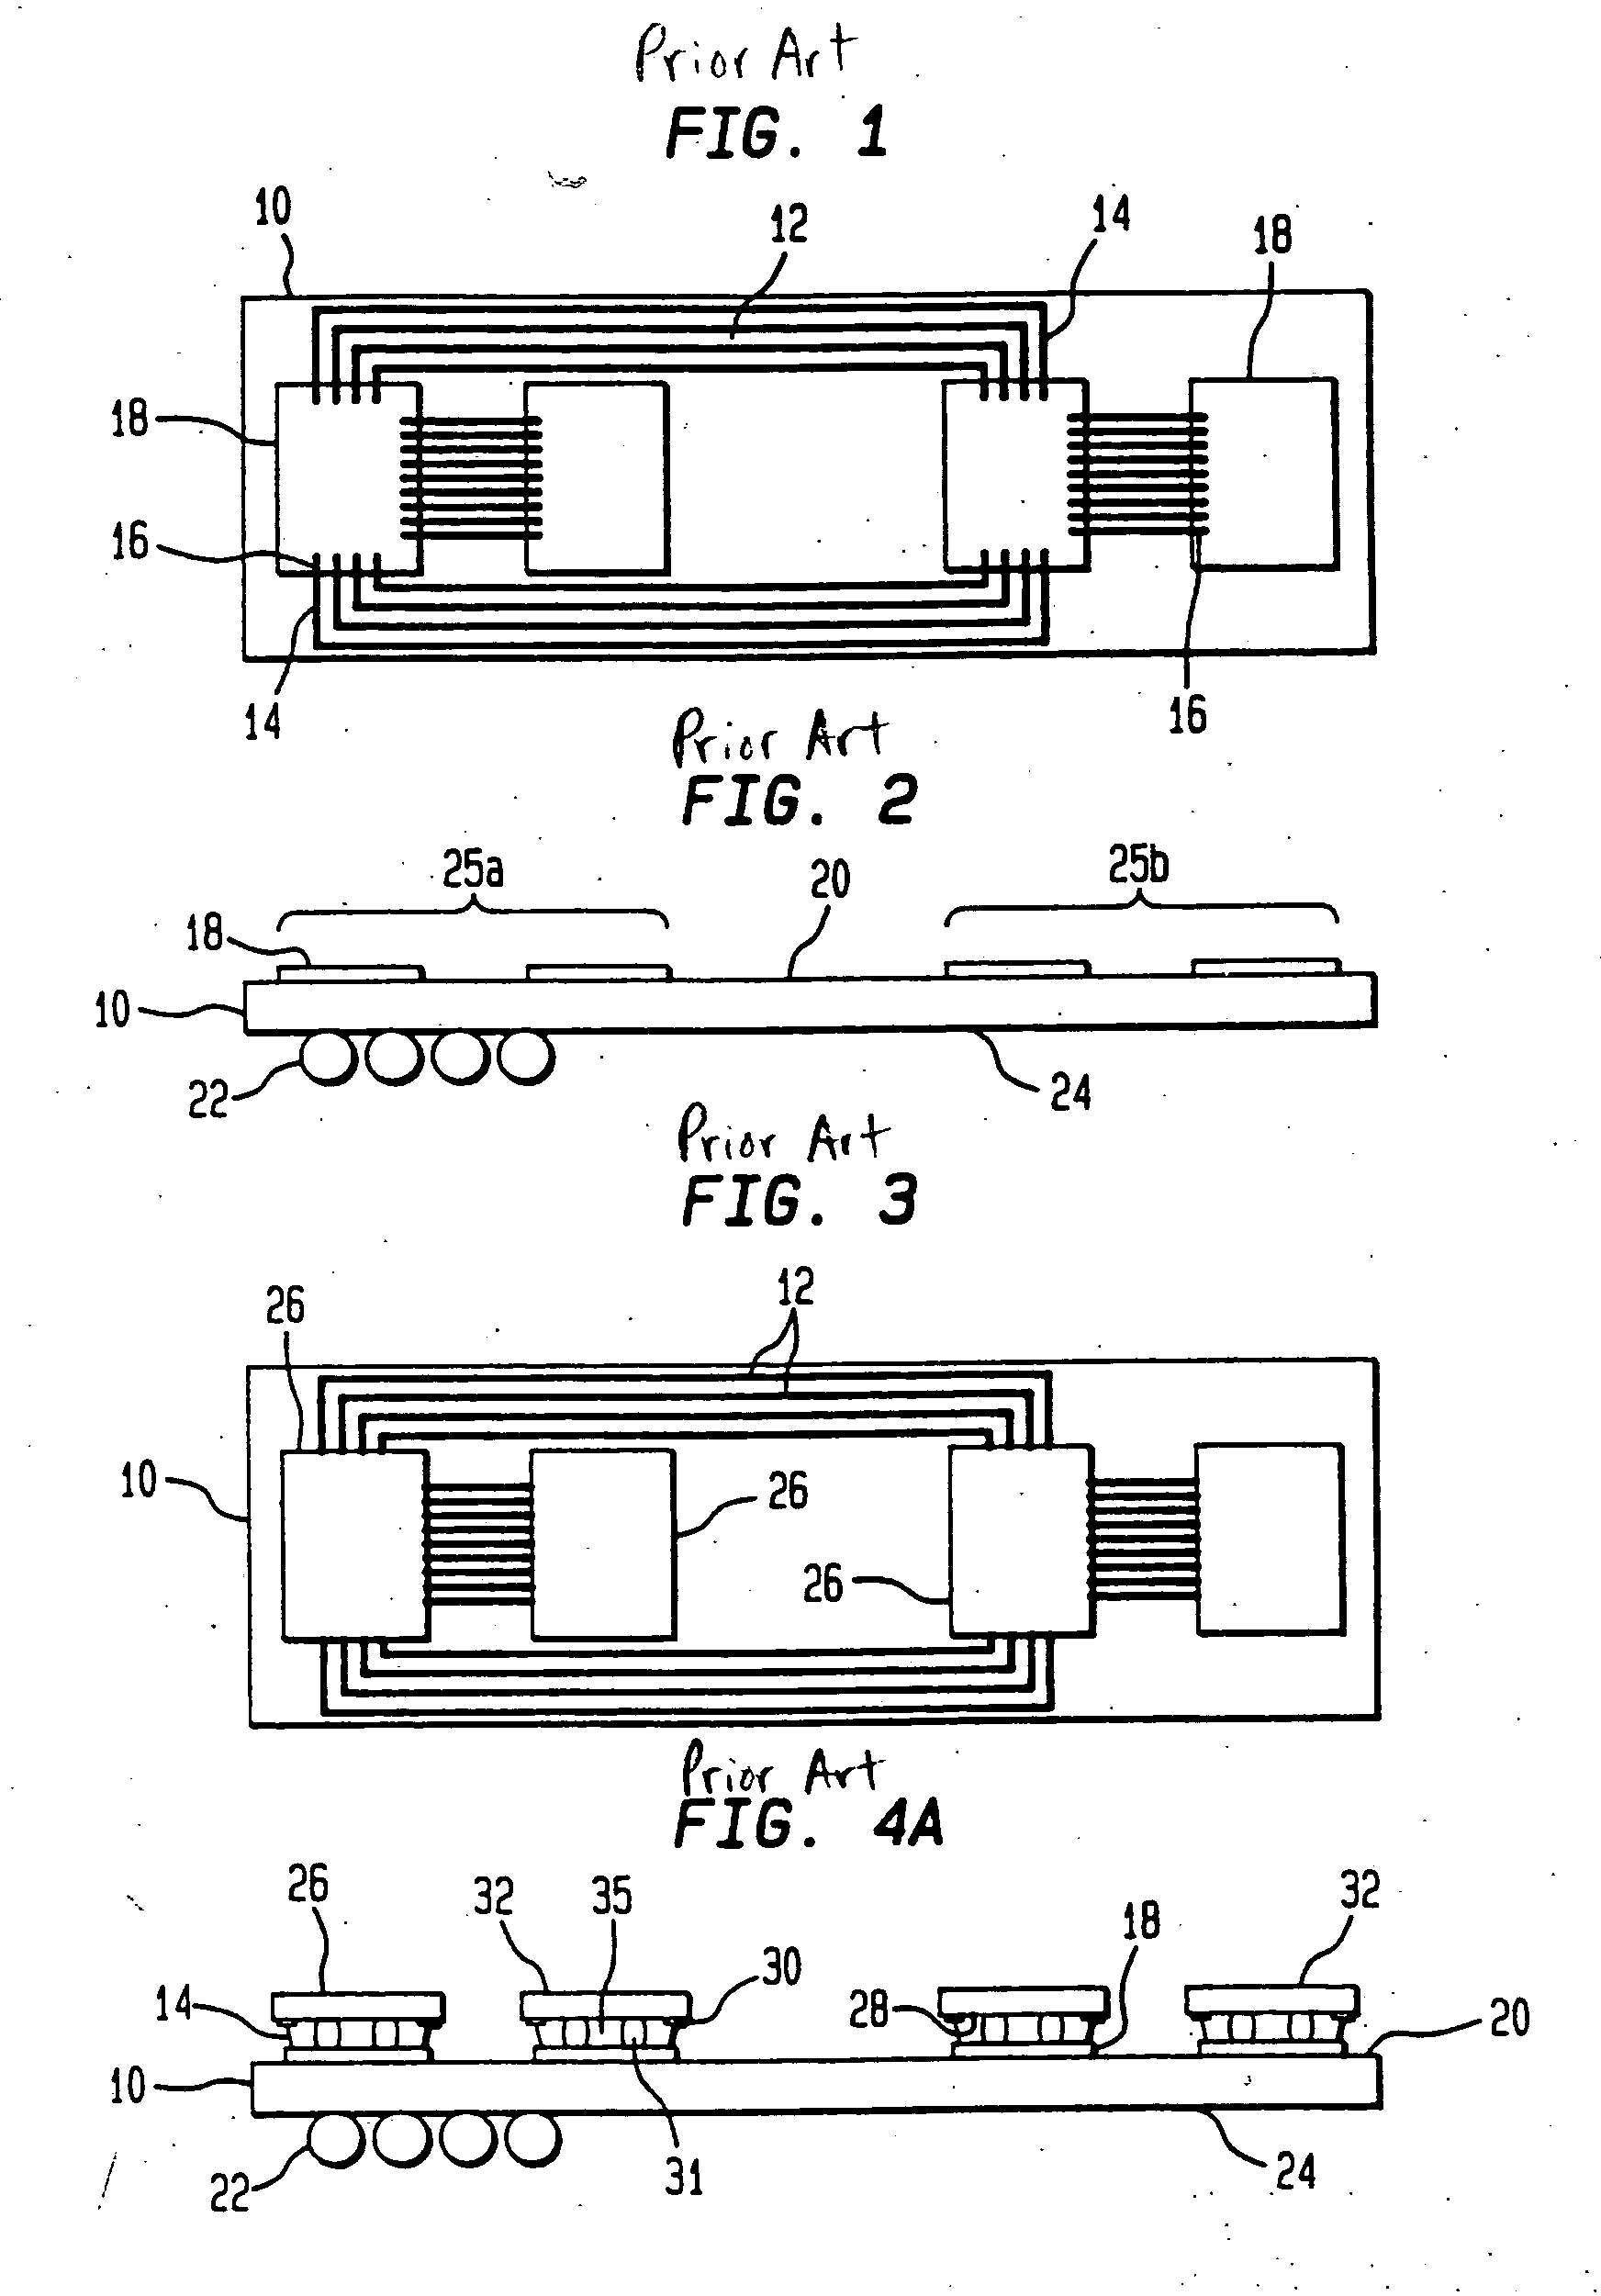 Stacked microelectronic assemblies having basal compliant layers